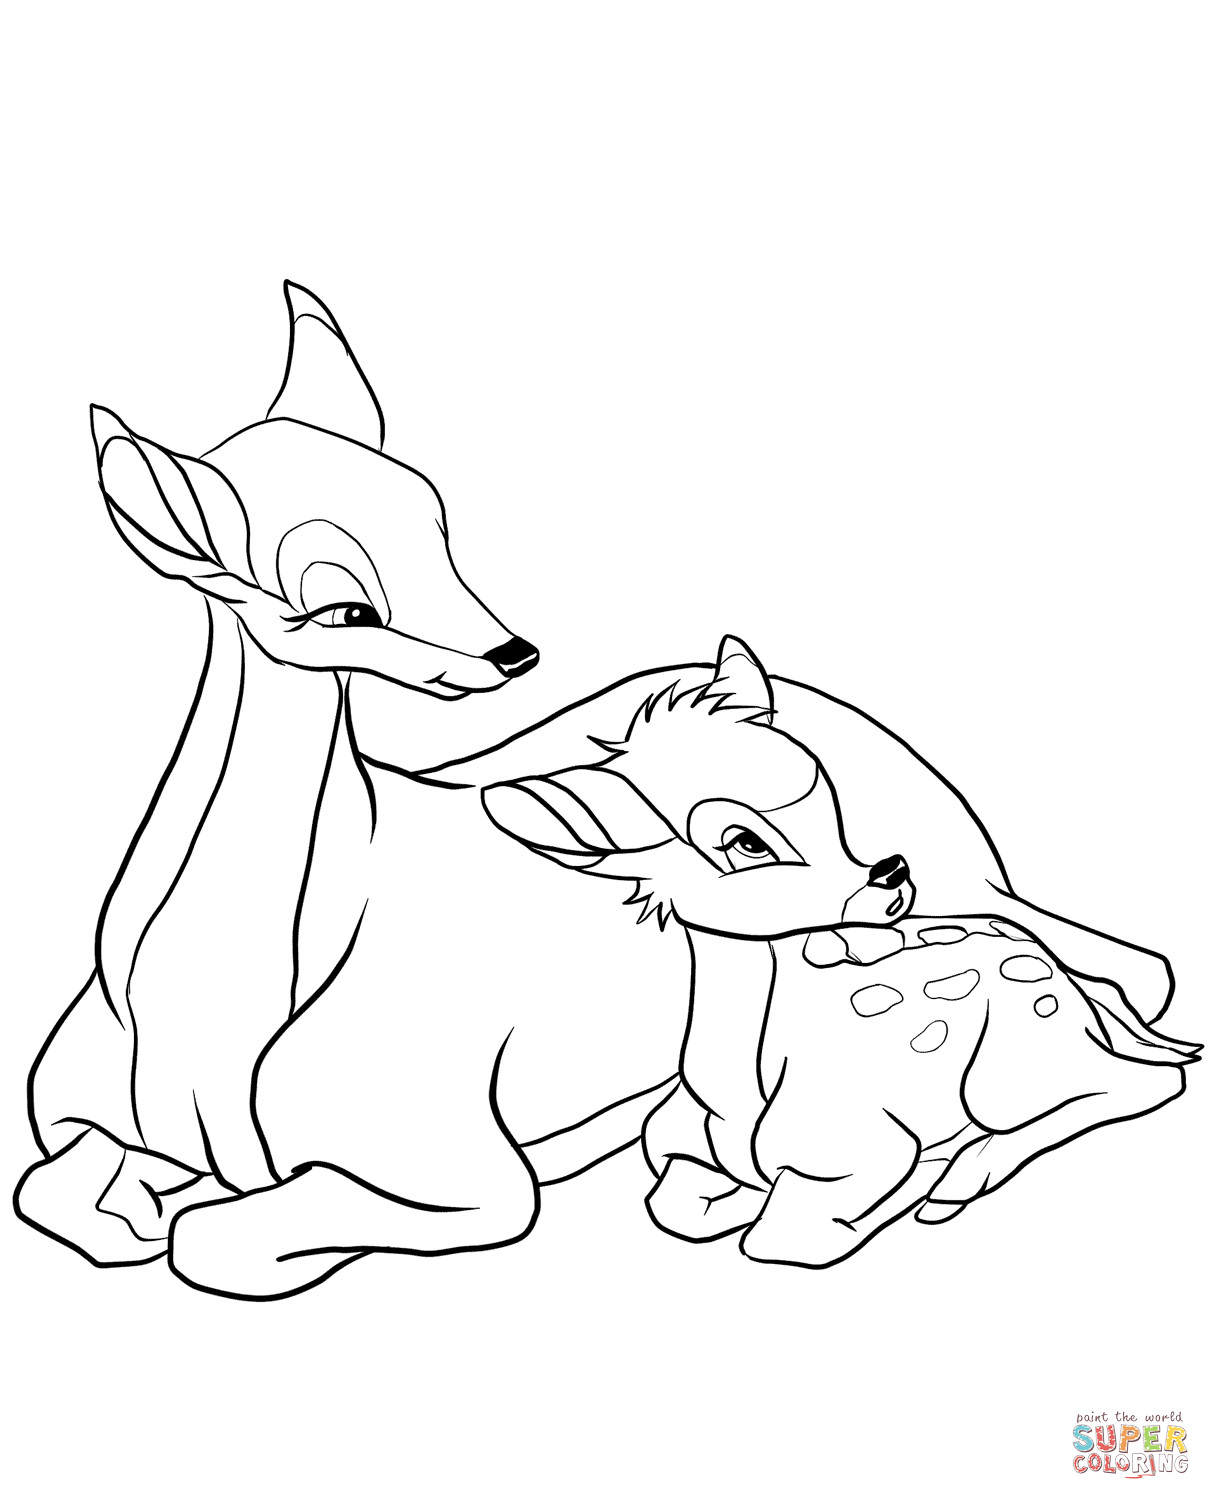 Bambi Coloring Pages
 Bambi with His Mother coloring page